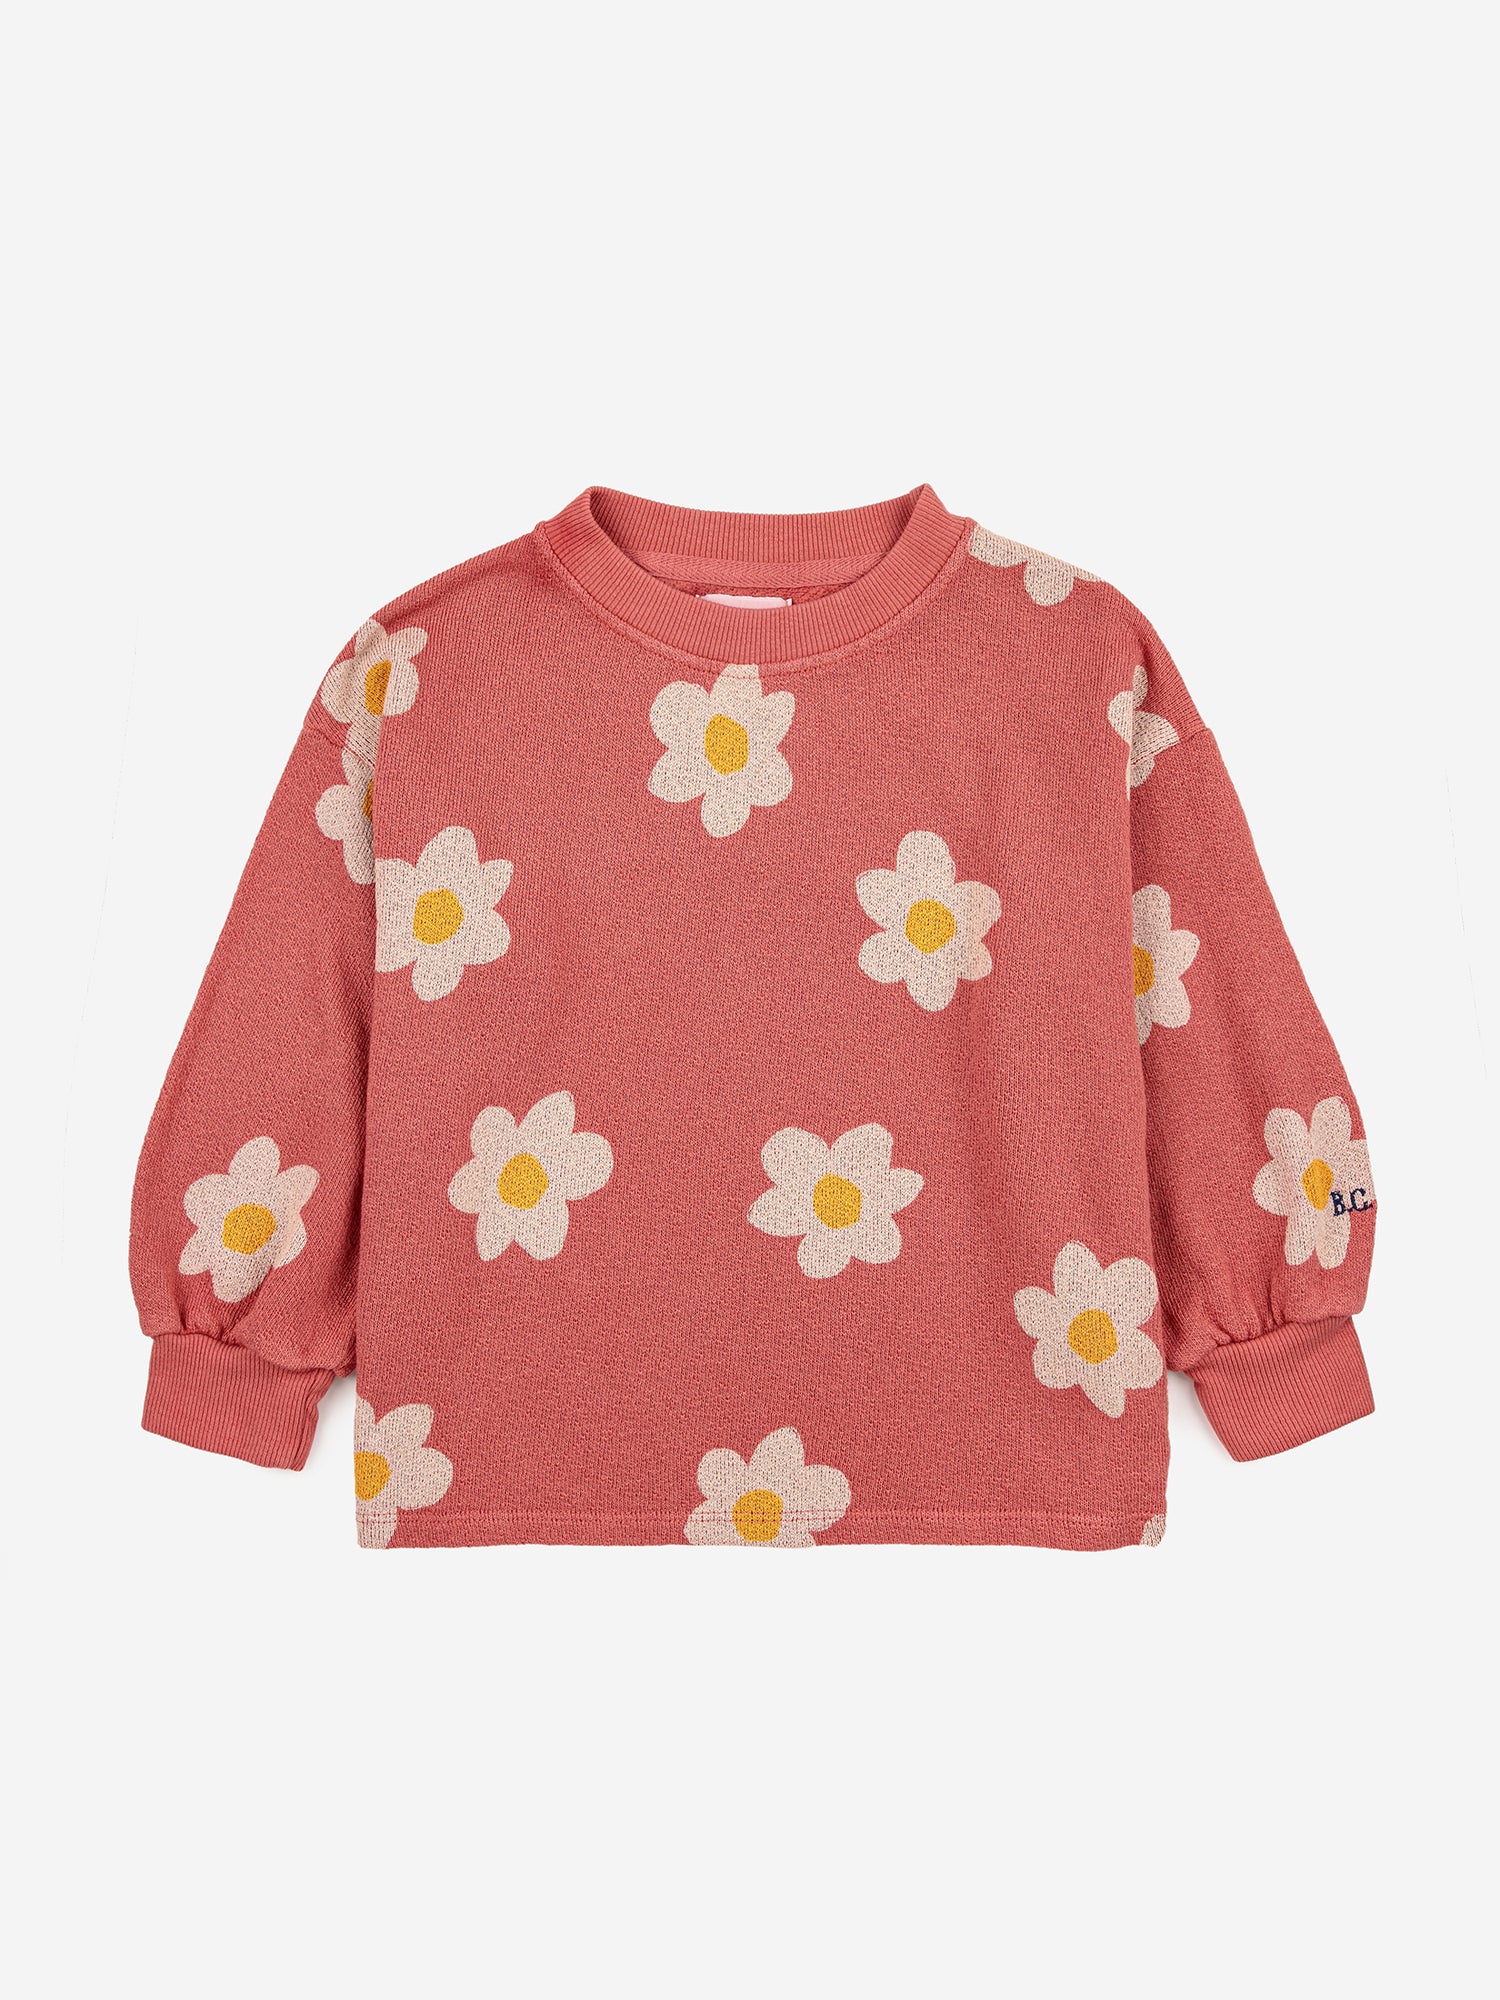 95% organic cotton 5% elastane salmon pink sweatshirt. Designed with long sleeves, dropped shoulder, front snap fastening, lining and patch pocket. It has a loose fit.  Made ethically and sustainably in Portugal for Bobo Choses.